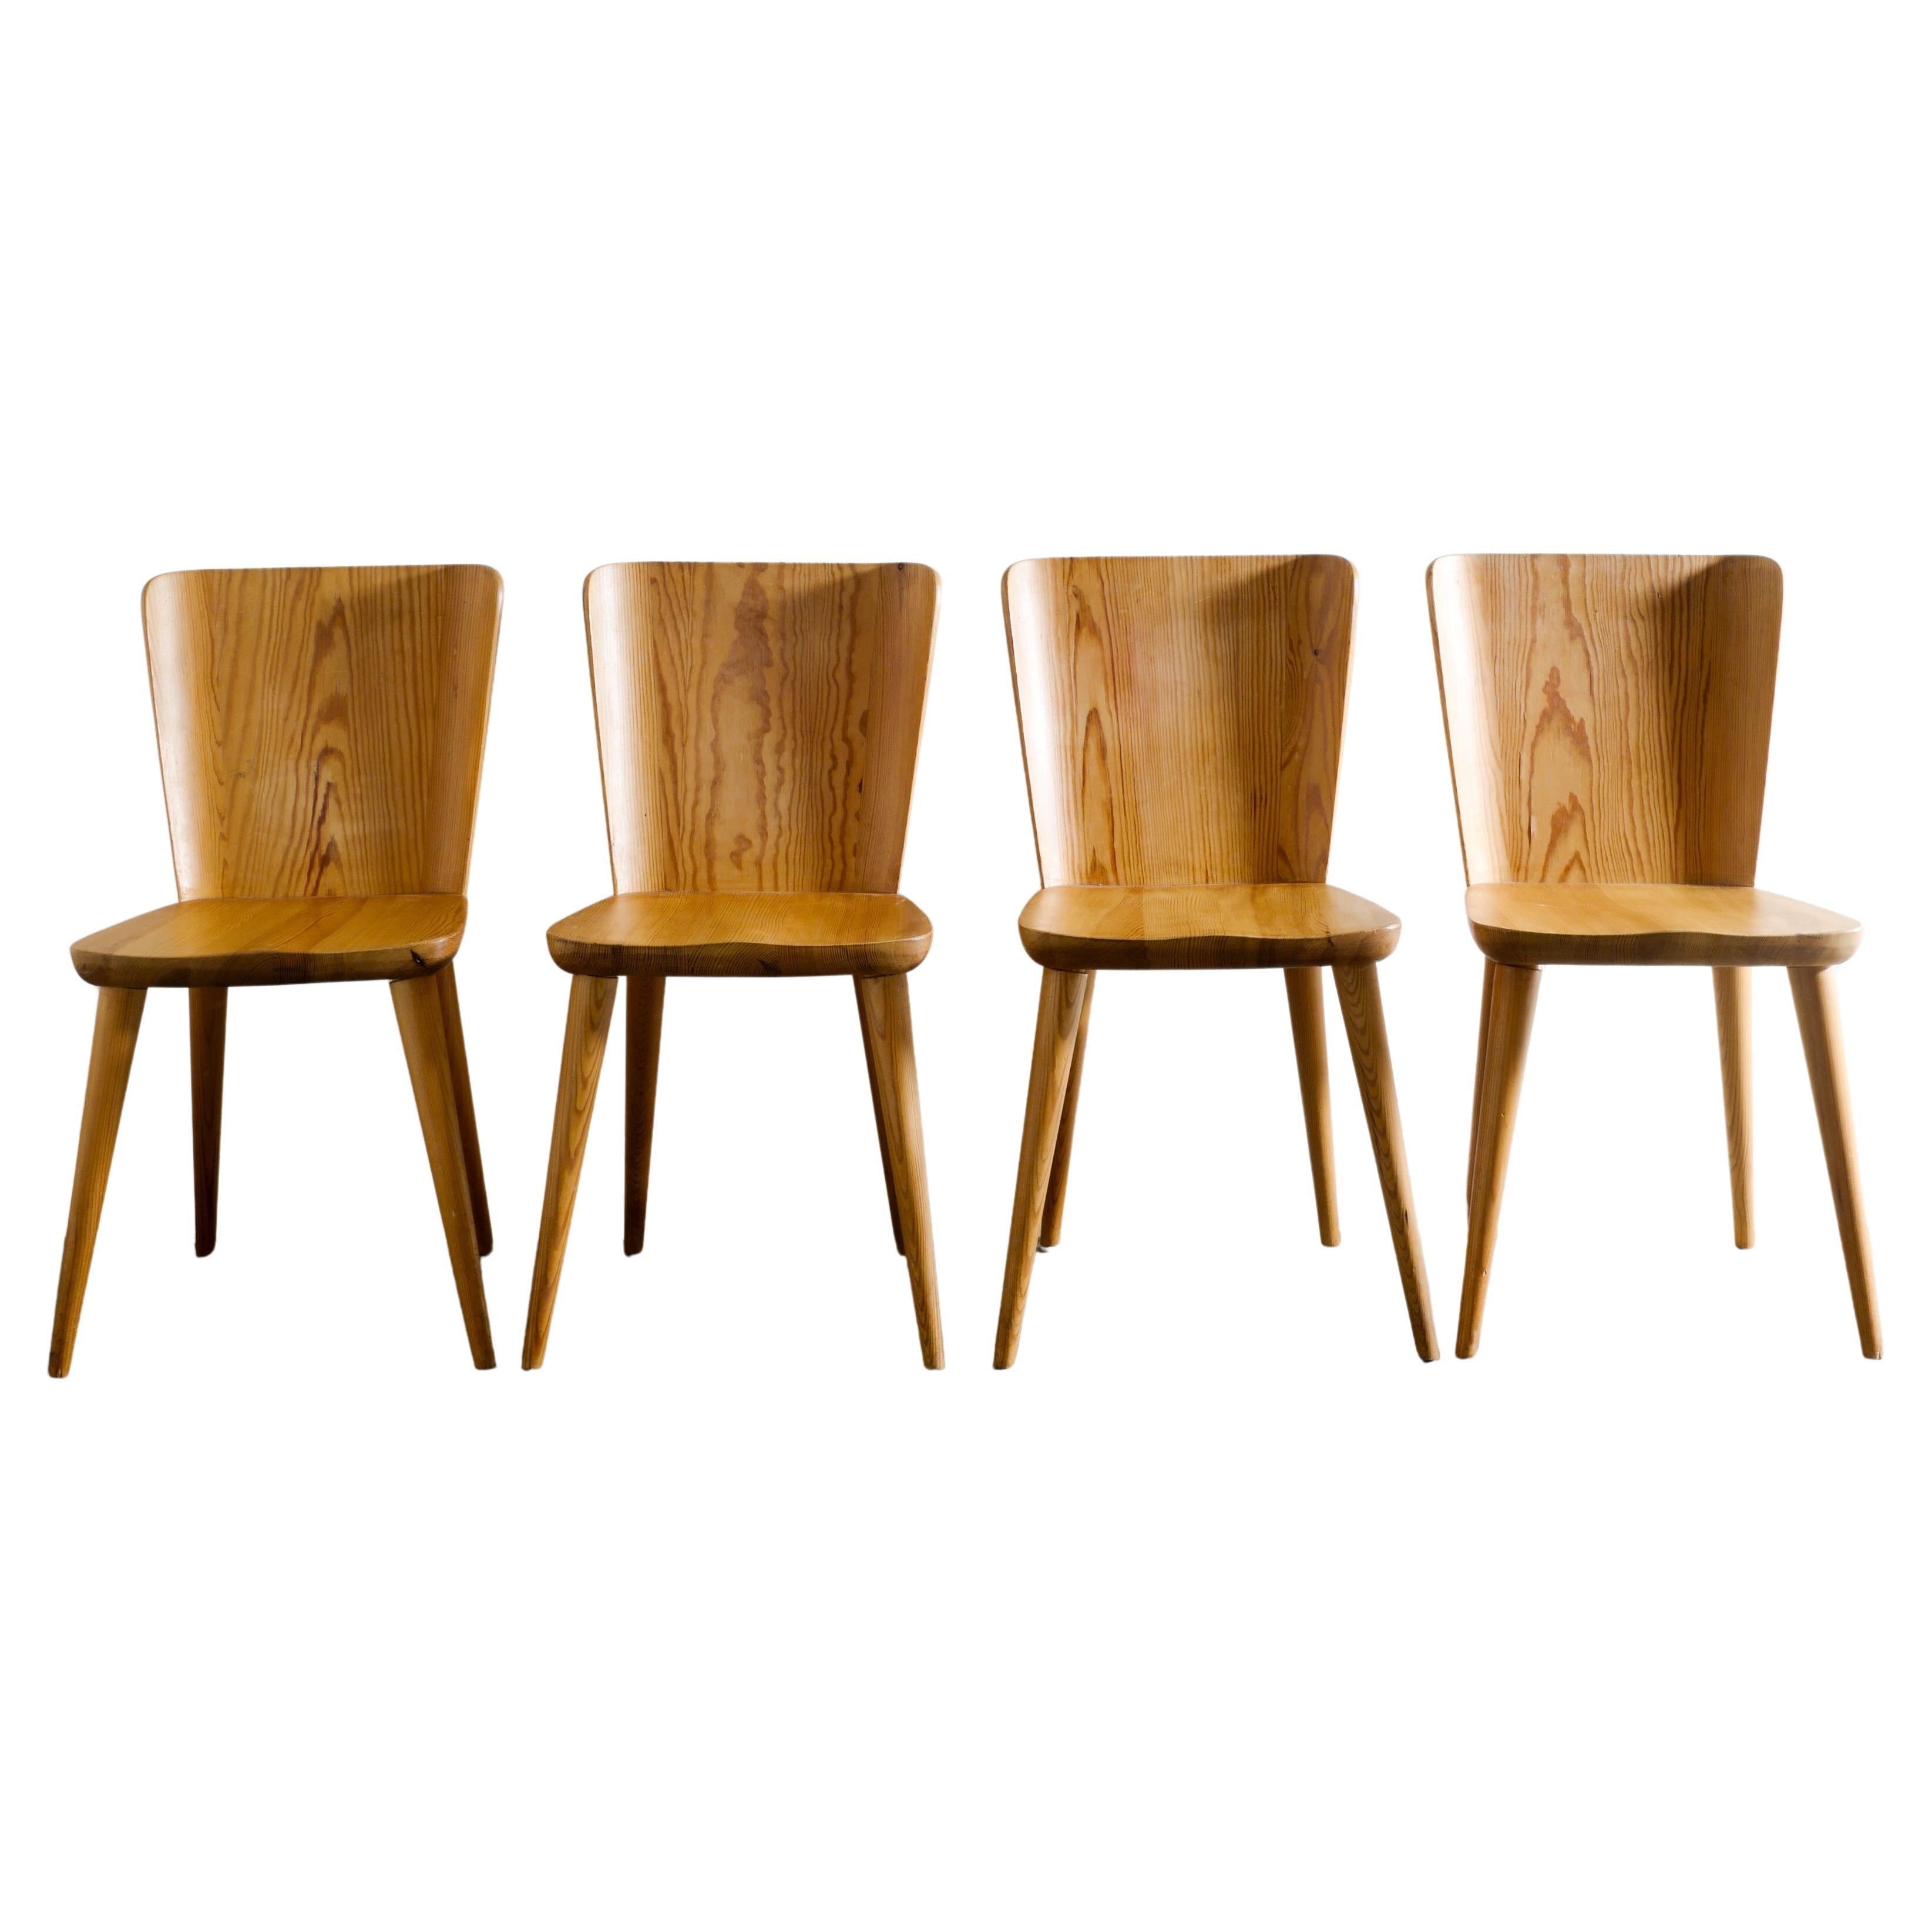 Four Göran Malmvall Mid Century Dining Chairs in Pine Produced in Sweden, 1940s